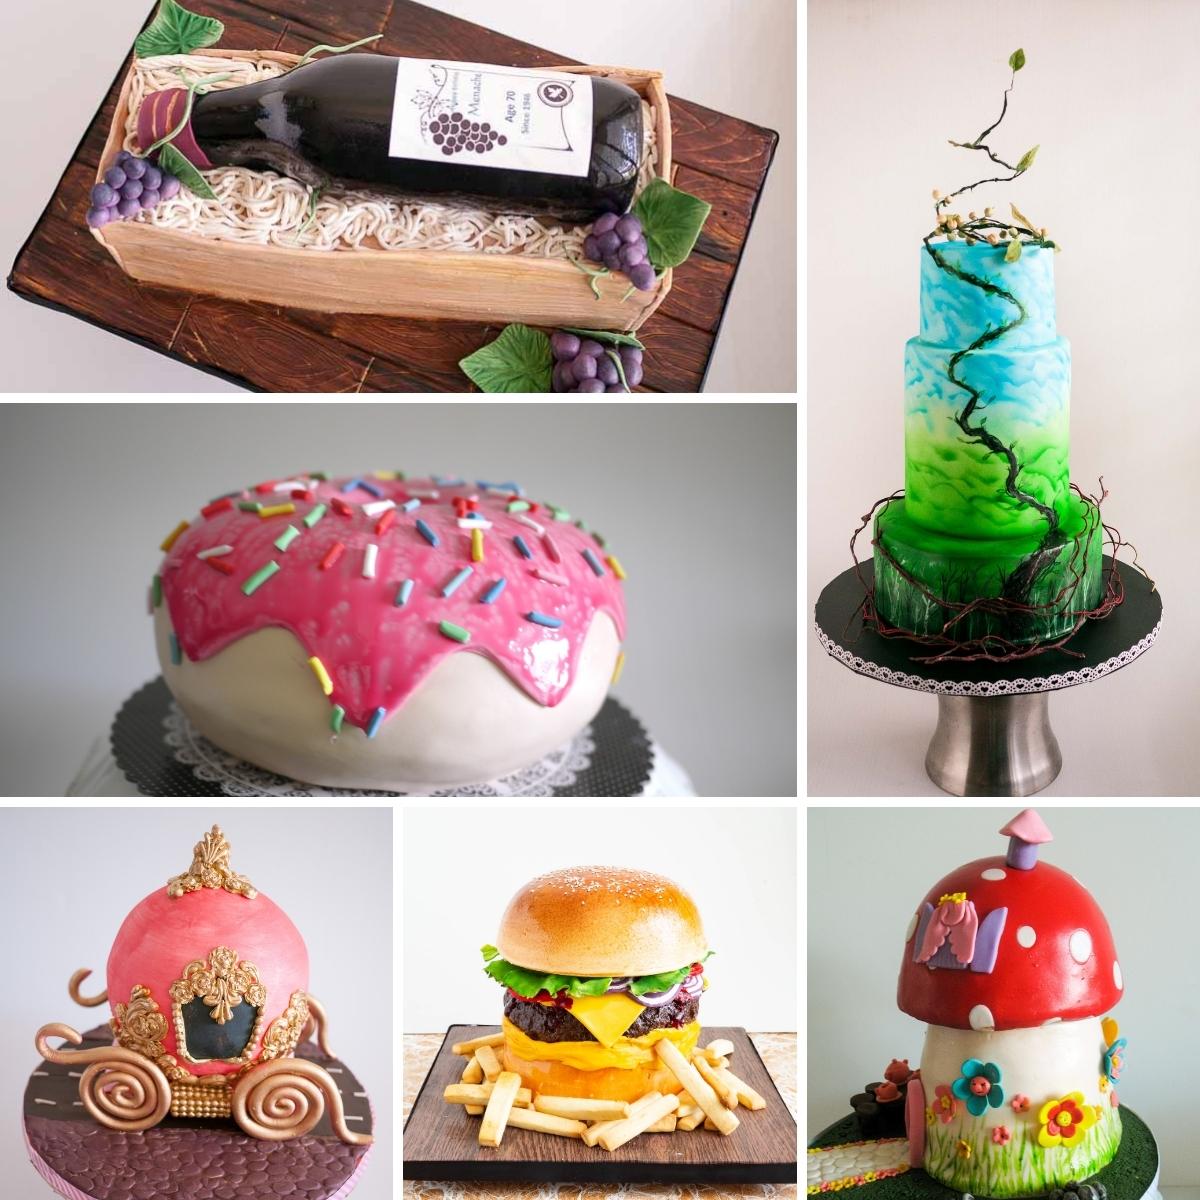 Time Management of an Effective Cake Artist